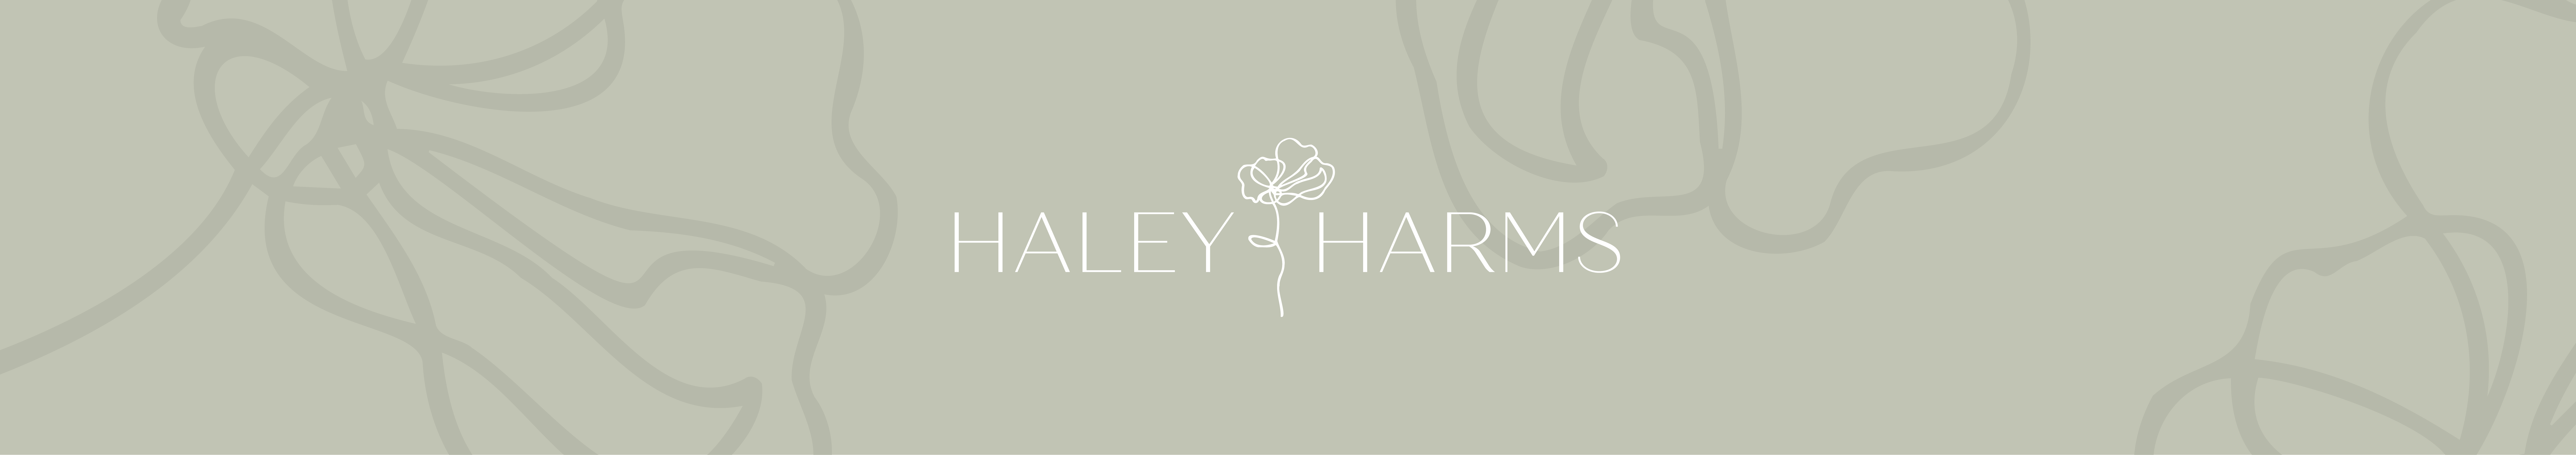 Haley Harms's profile banner